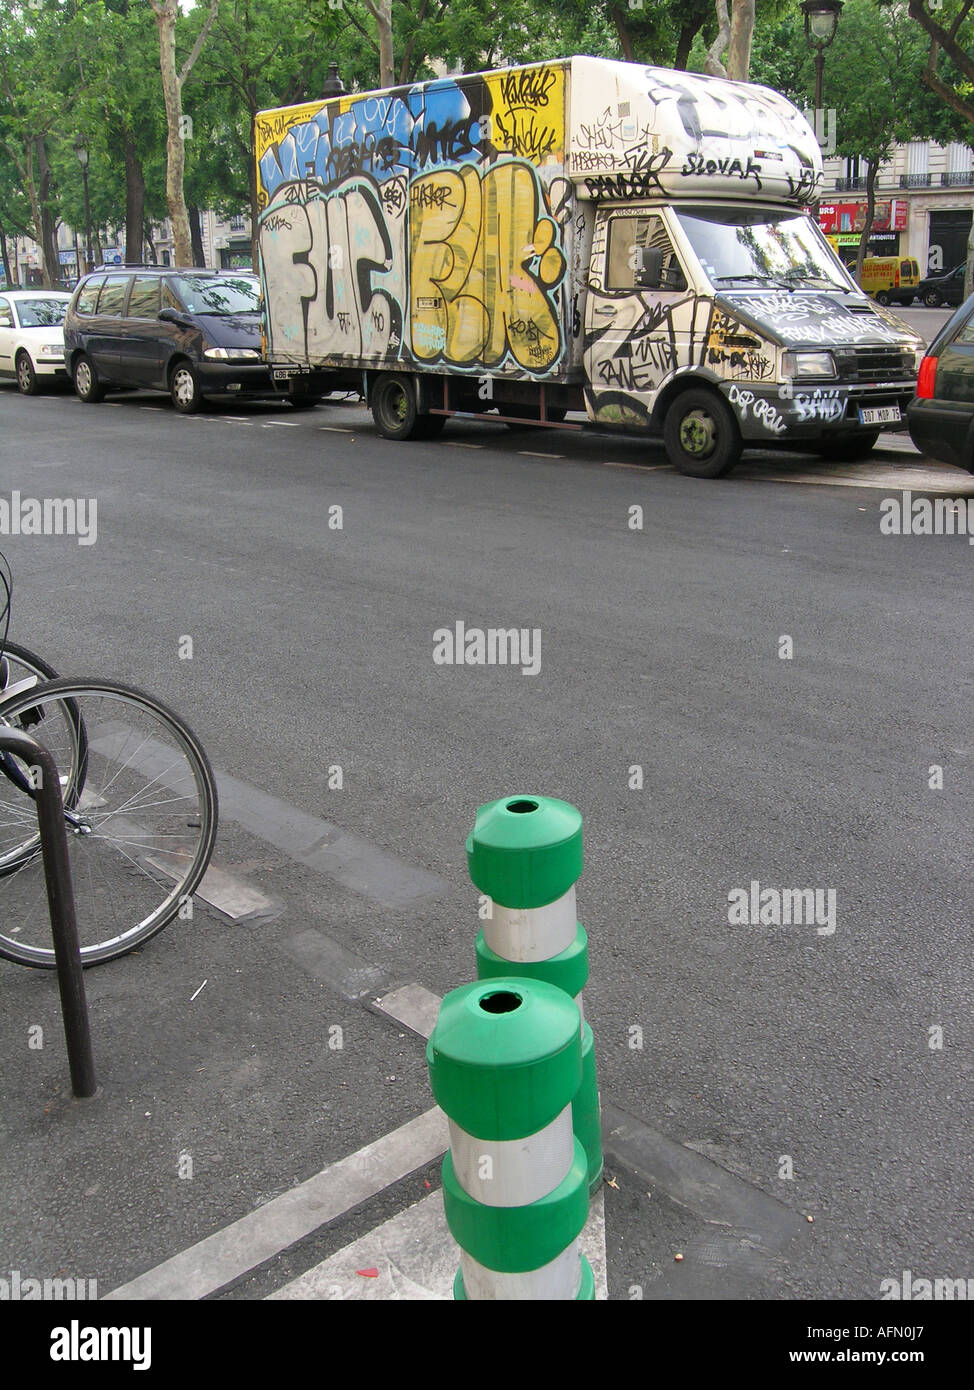 Urban street scene with vandalised graffiti covered minivan parked in Boulevard Voltaire Paris France Stock Photo